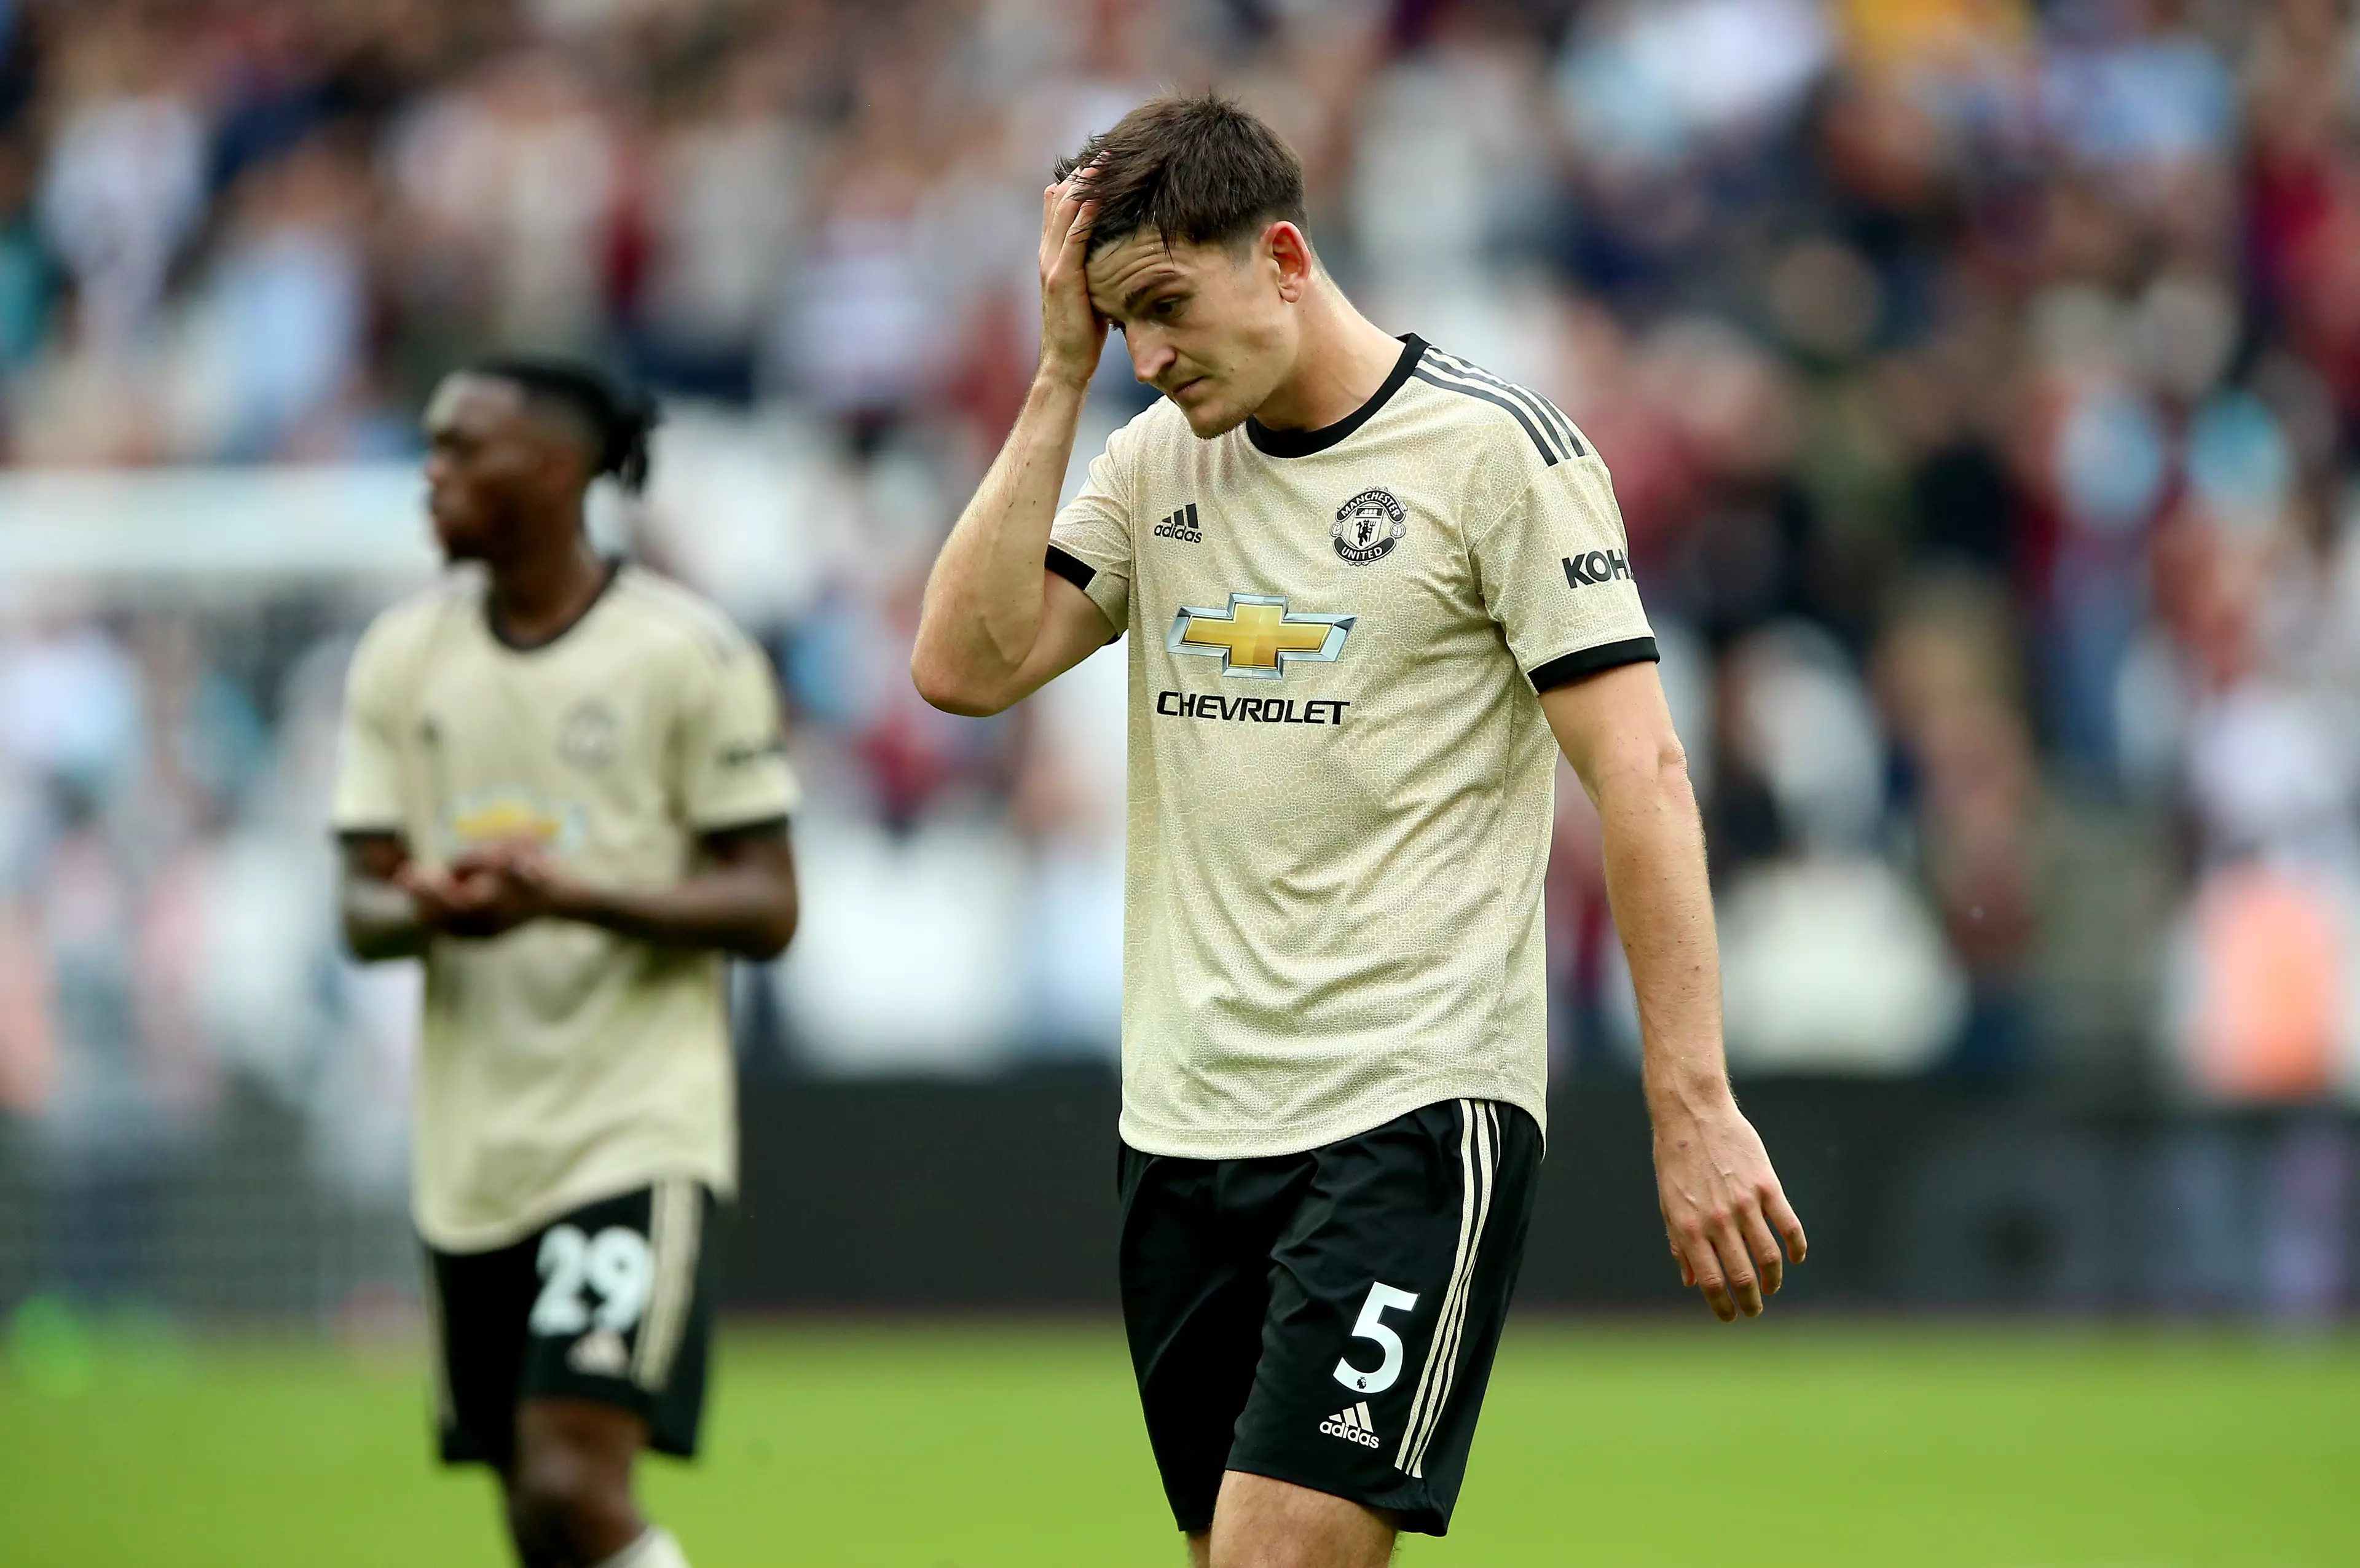 Manchester United have made their worst start to a season in 30 years